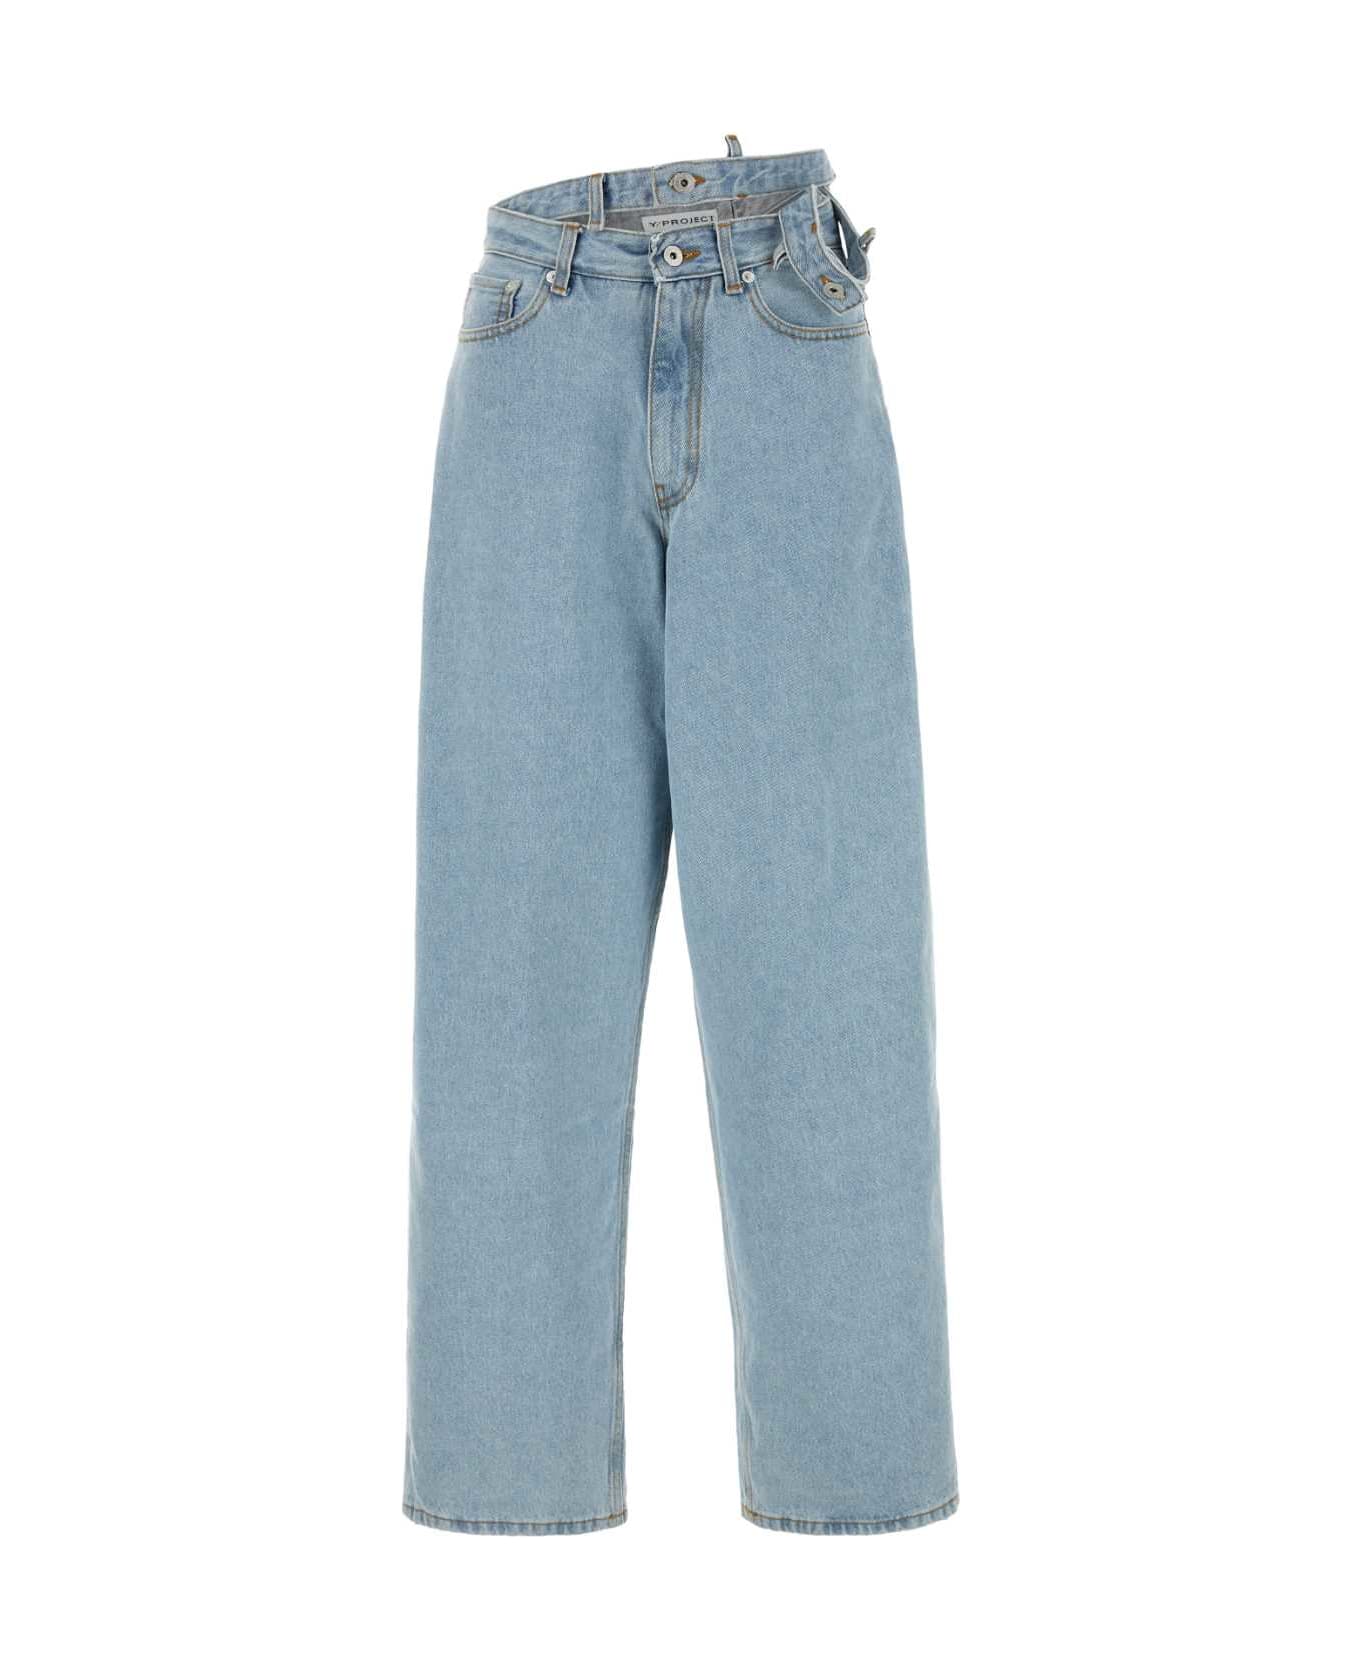 Y/Project Light Blue Denim Jeans - EVERGREEN ICE BLUE